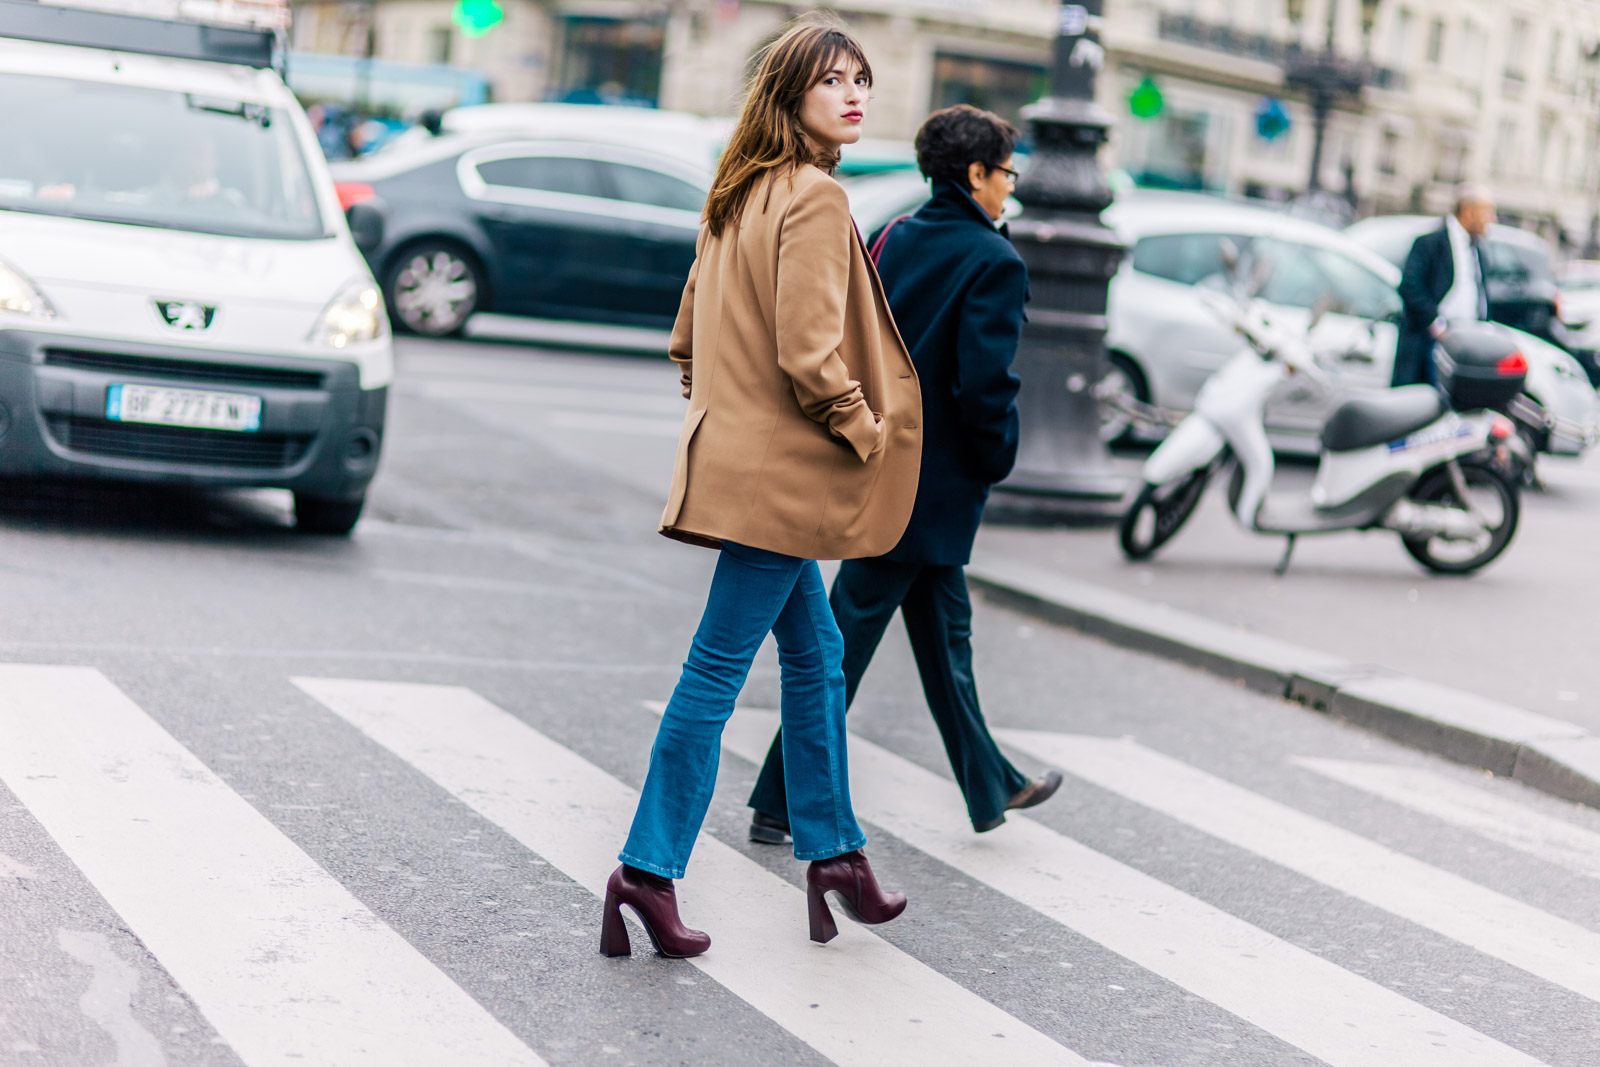 The Most Memorable Street Style Moments of 2015